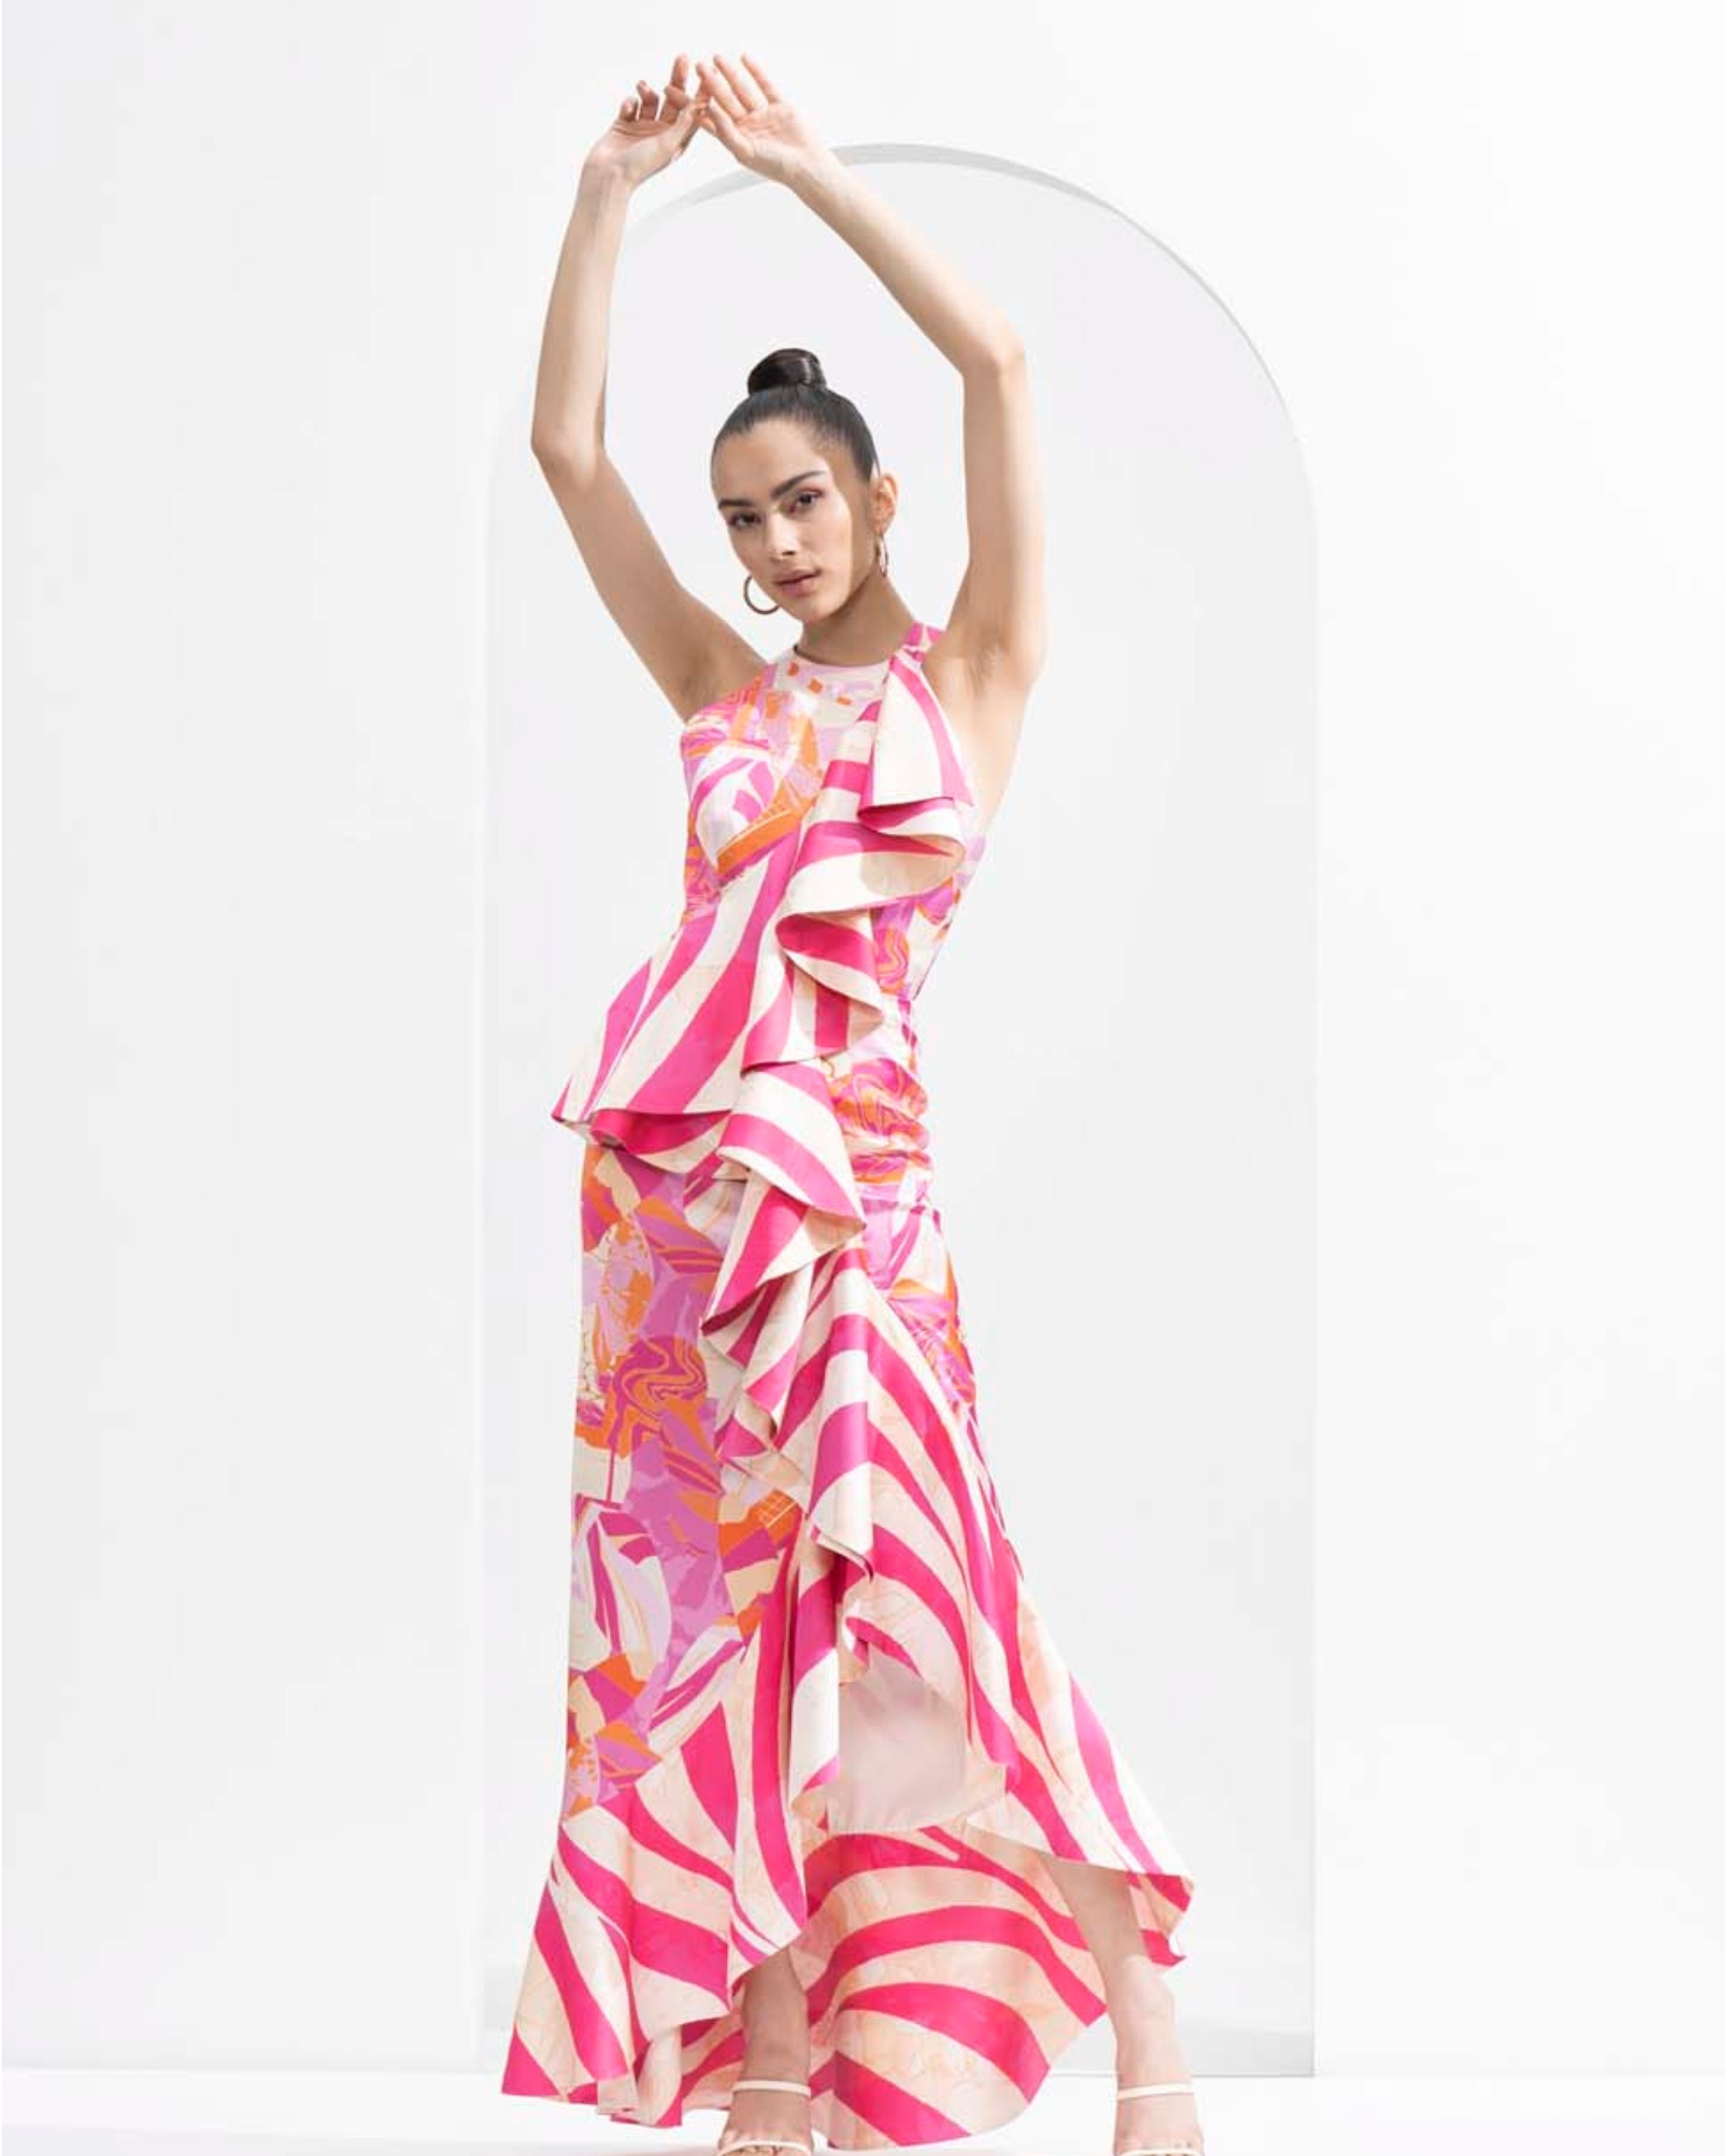 Pink abstract lustrous satin bodycon dress with an asymmetric frill and gold accessory.